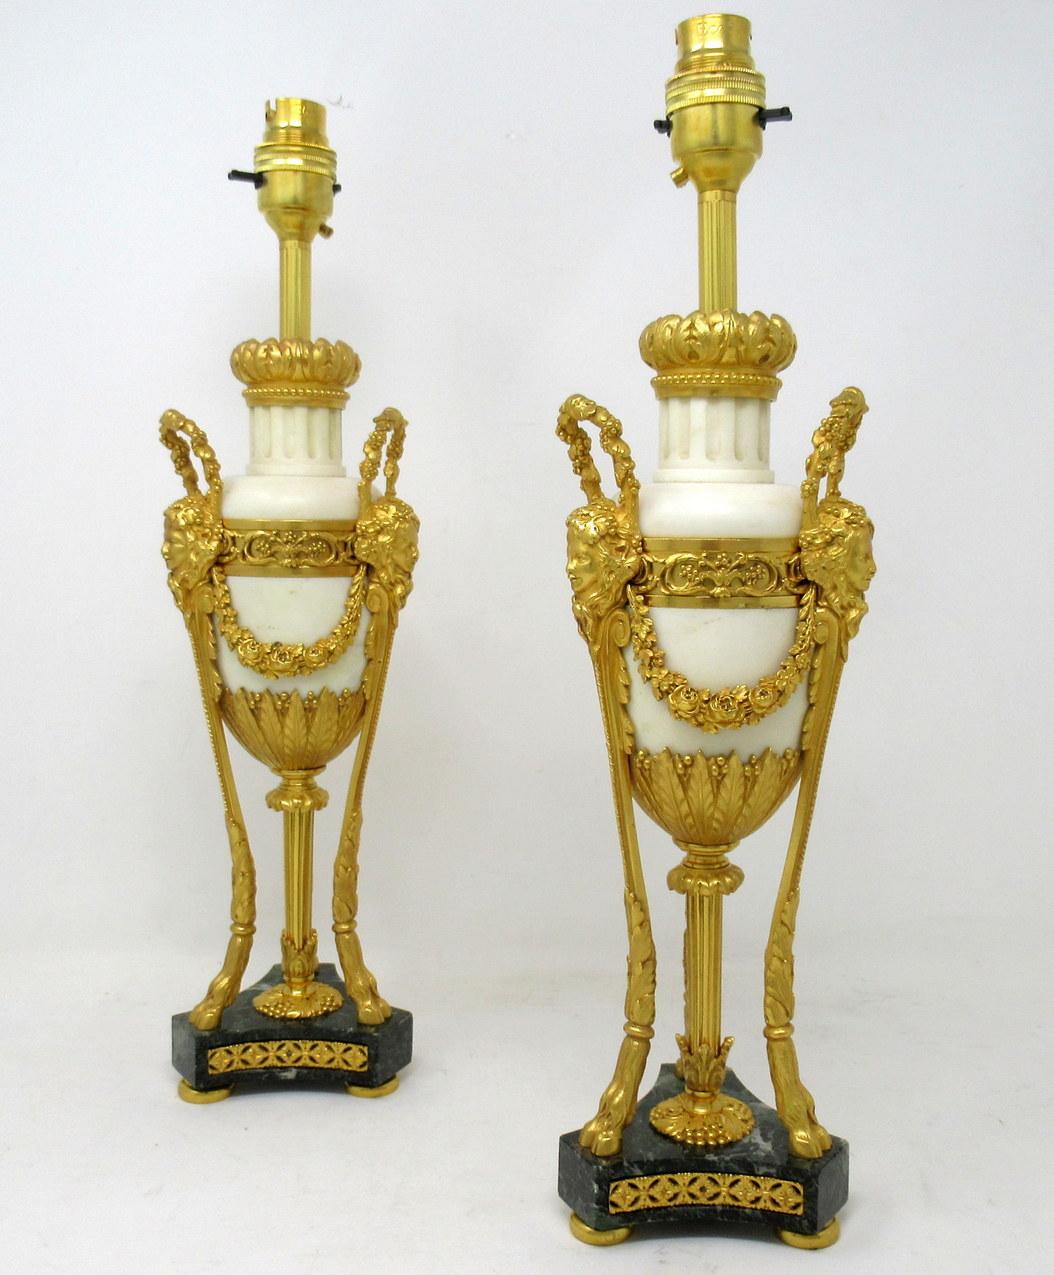 An exceptionally fine quality pair of French heavy gauge chisel cast ormolu-mounted statutory marble garniture urns, of elegant tall proportions, of French origin, now professionally converted to a pair electrical table lamps. First quarter of the